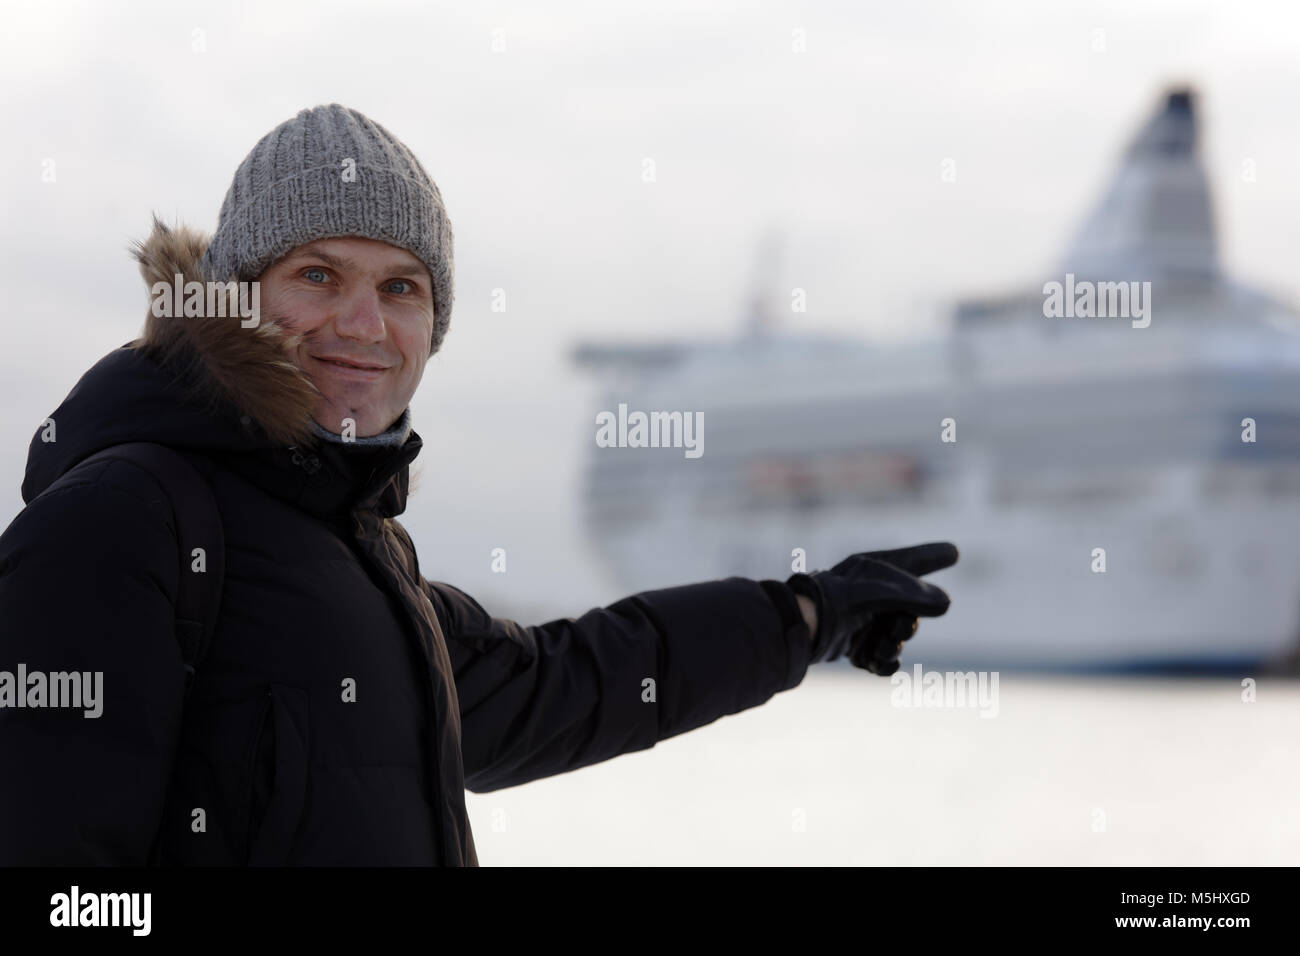 Mature man in winter clothes pointing to a cruise ship Stock Photo